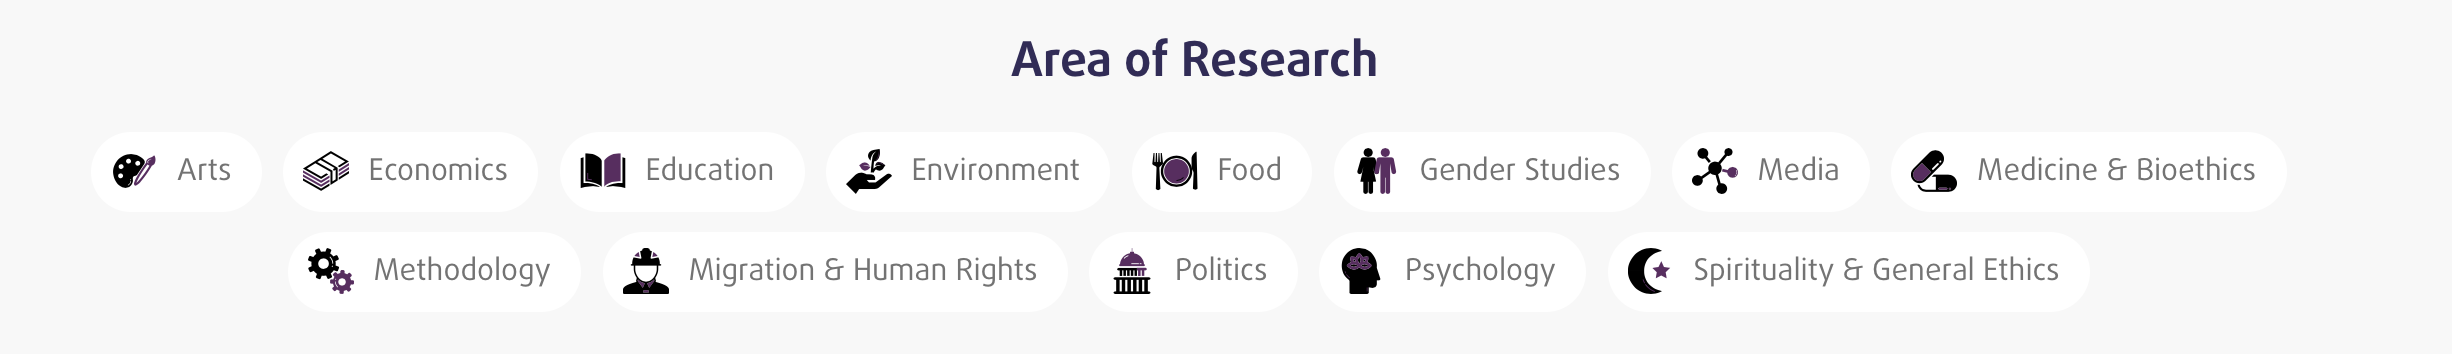 Area of Research